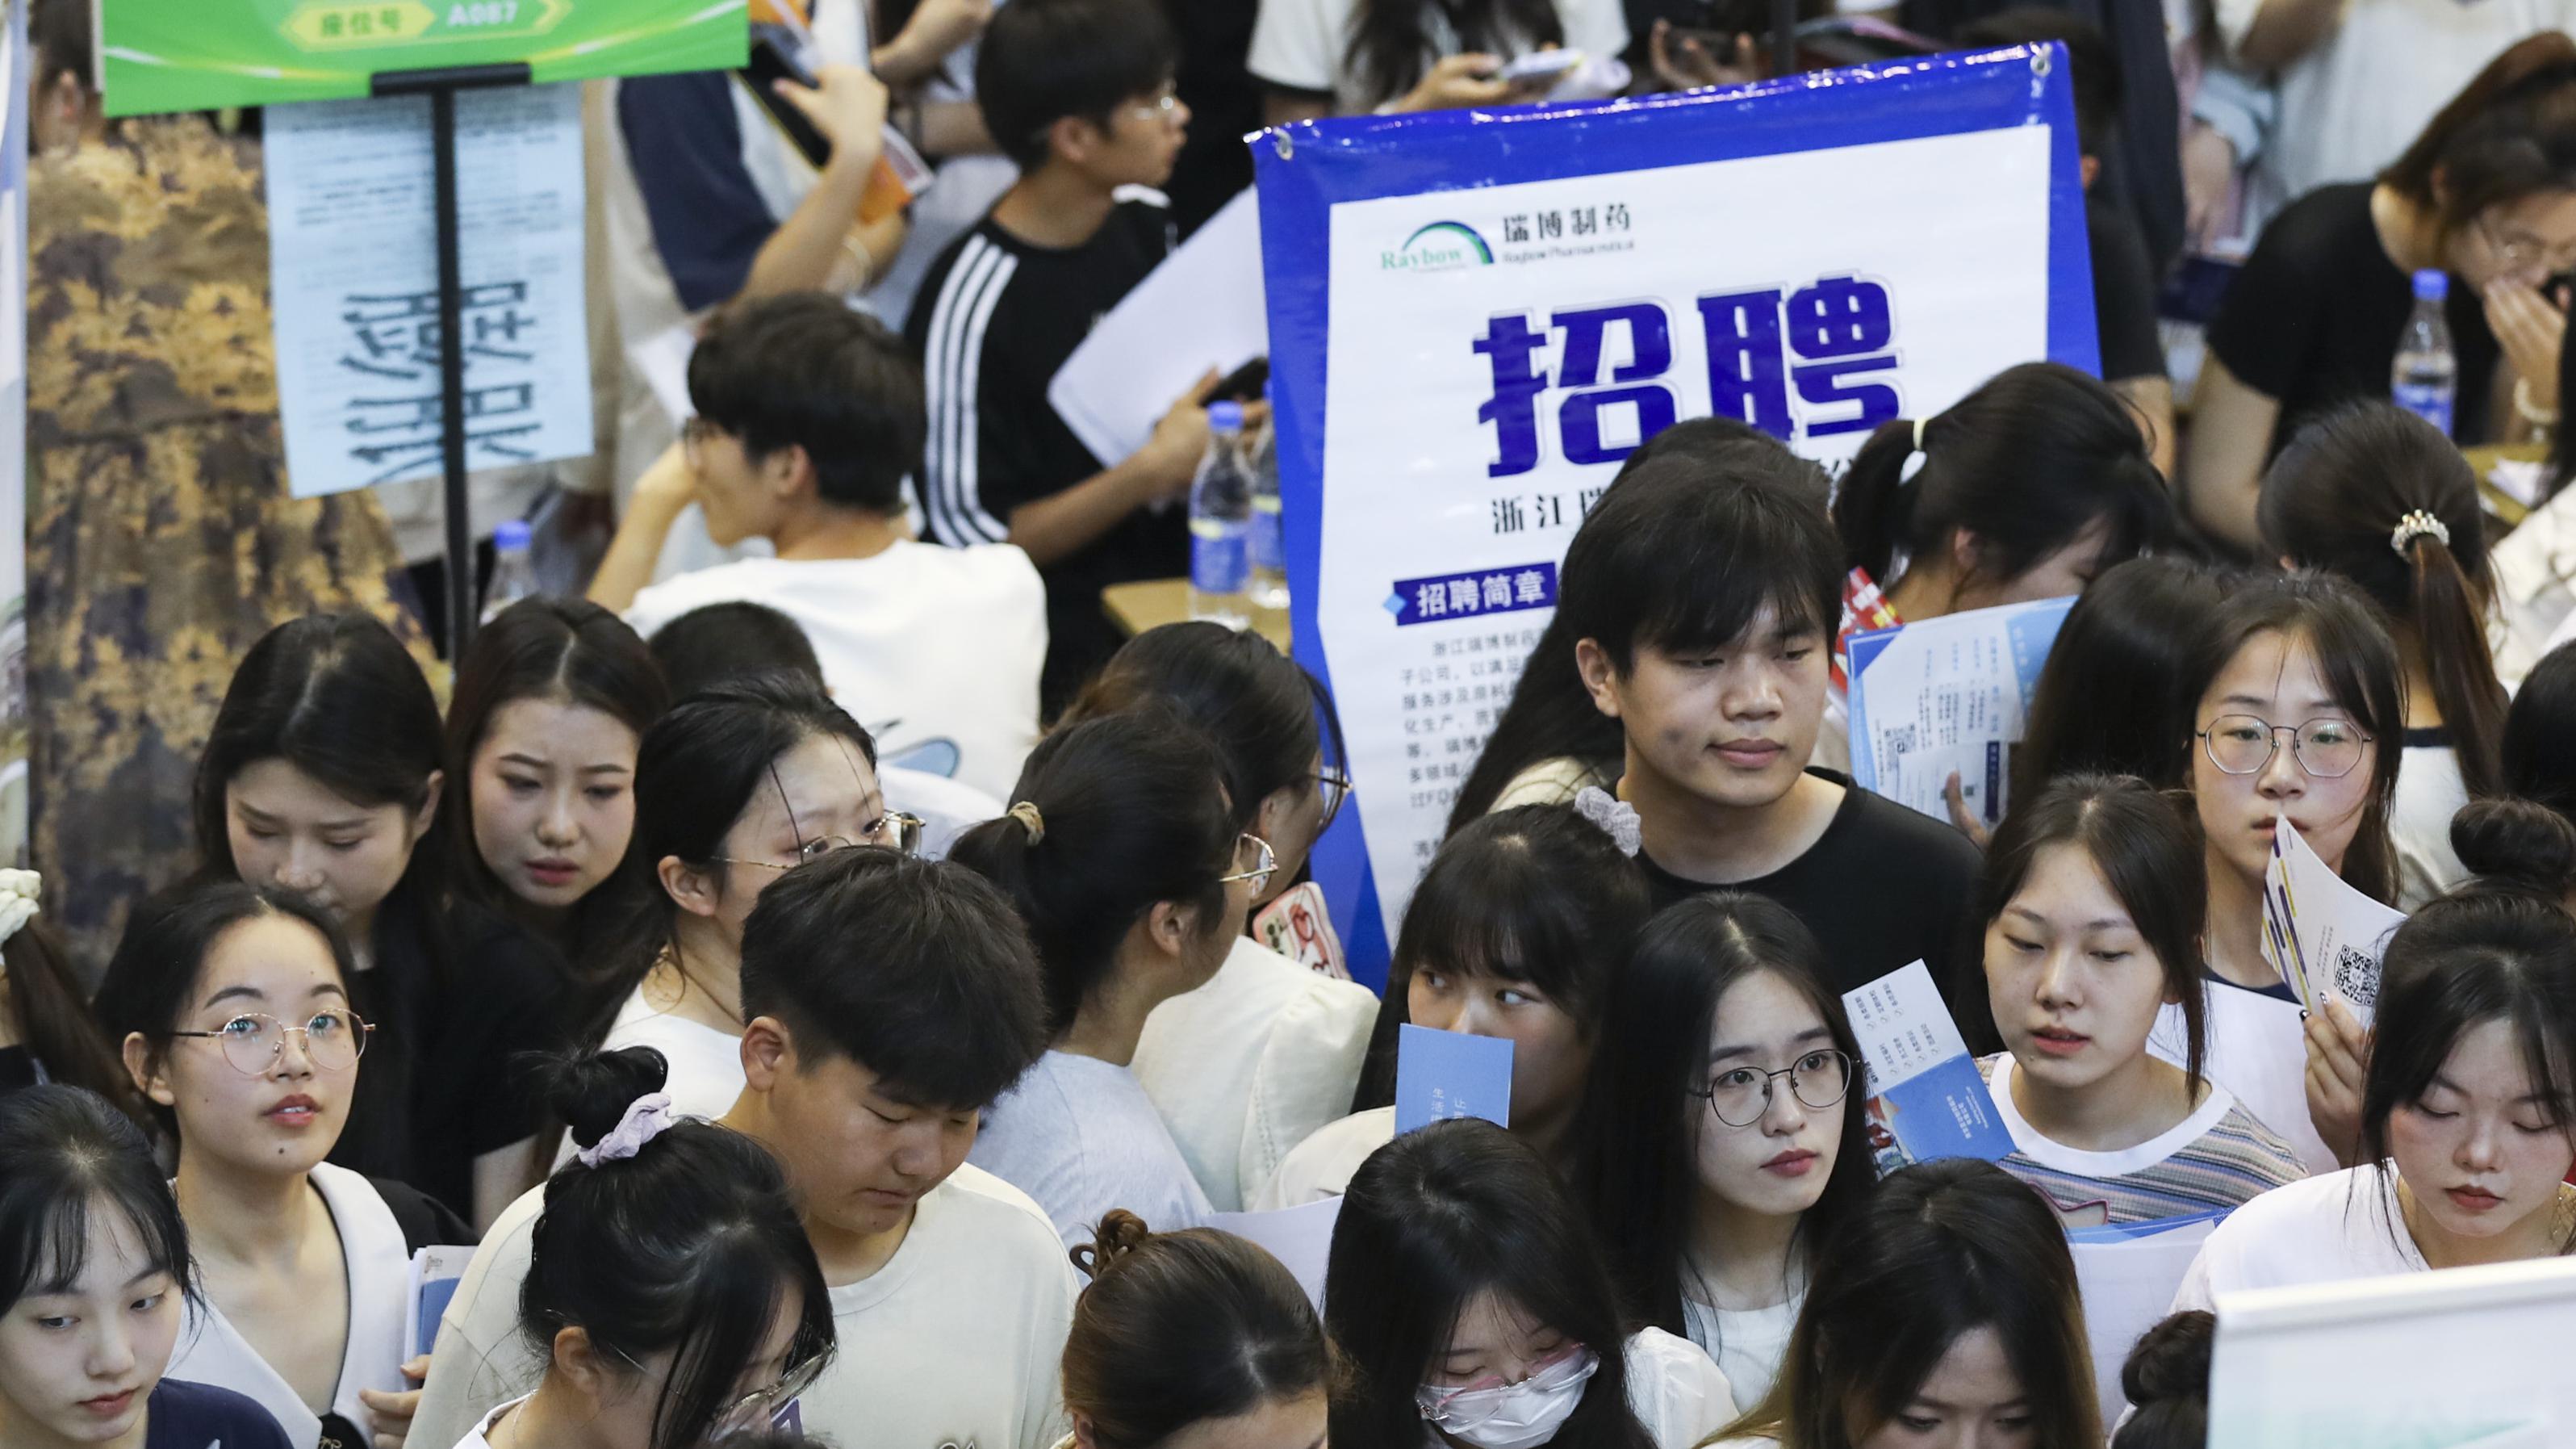 College students at a jobs fair in China's Jiangsu province